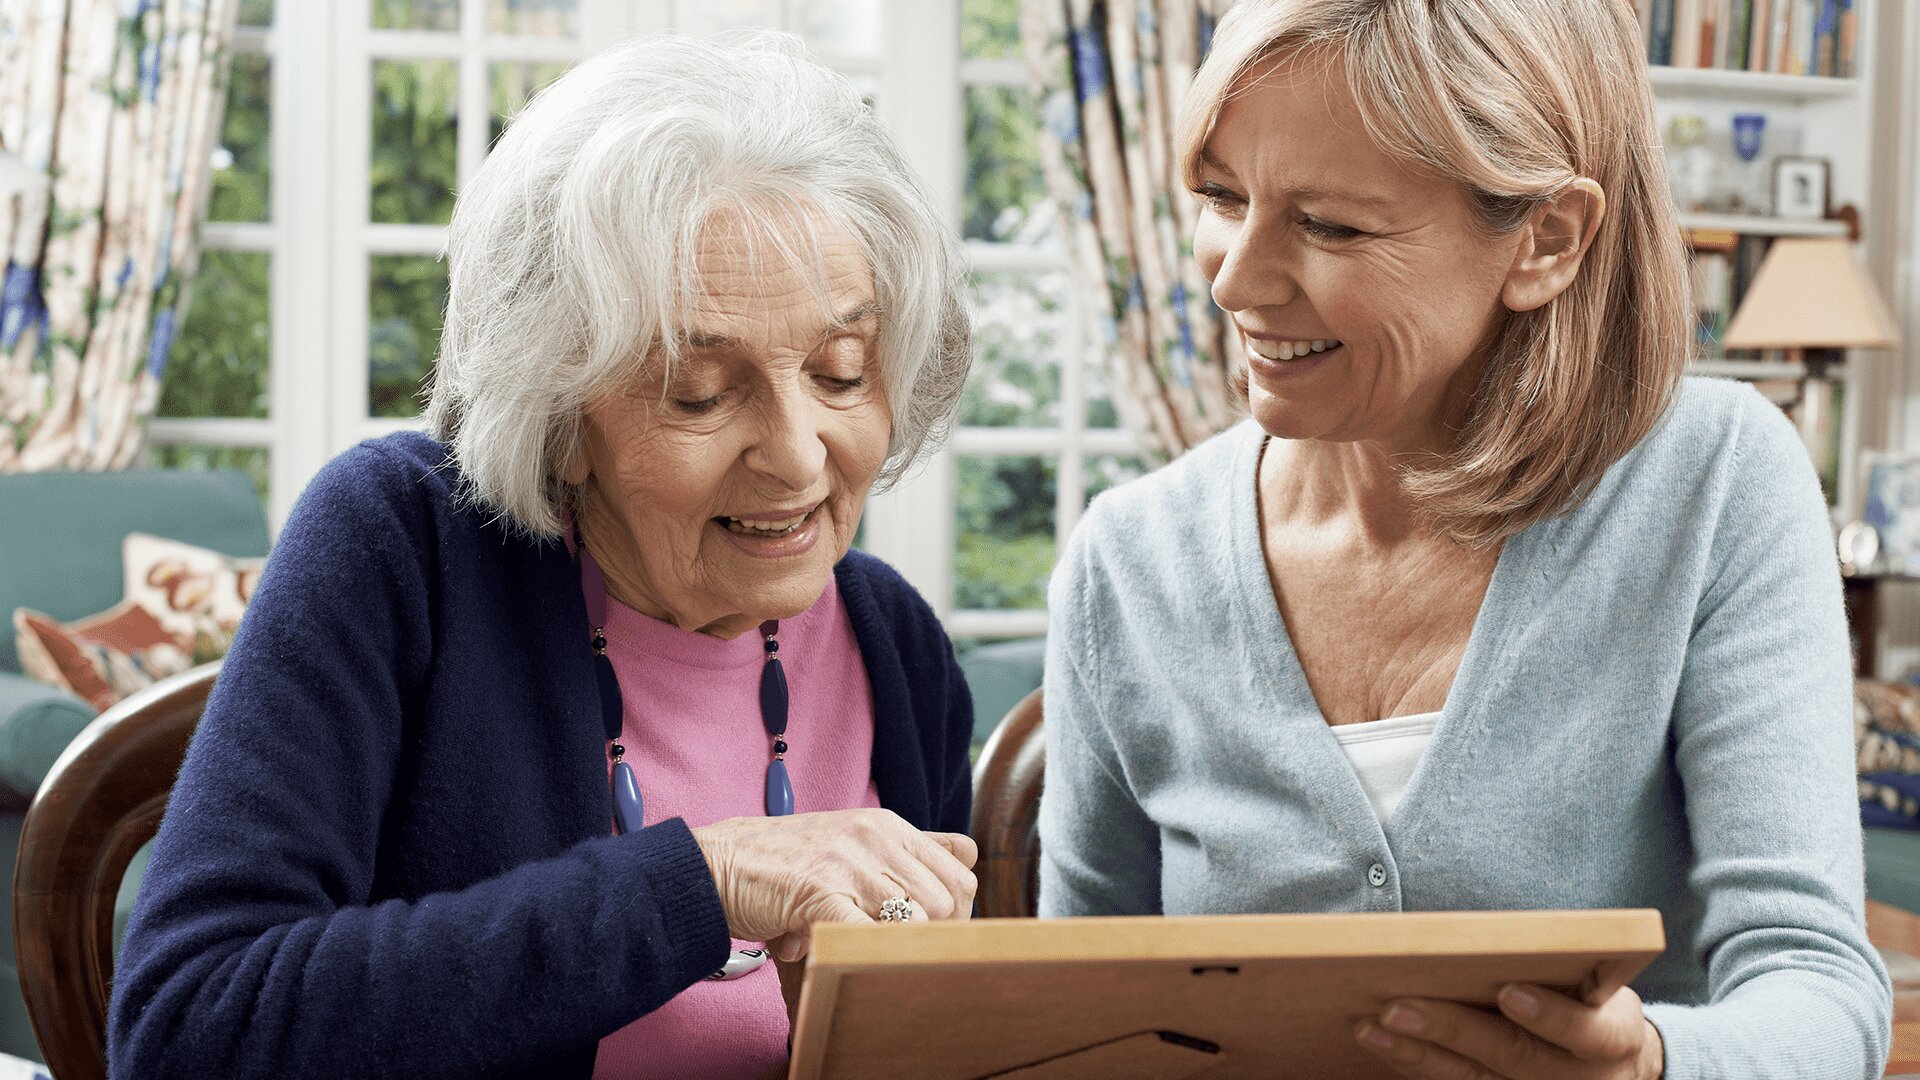 A senior woman looking at a photo with a middle-aged woman